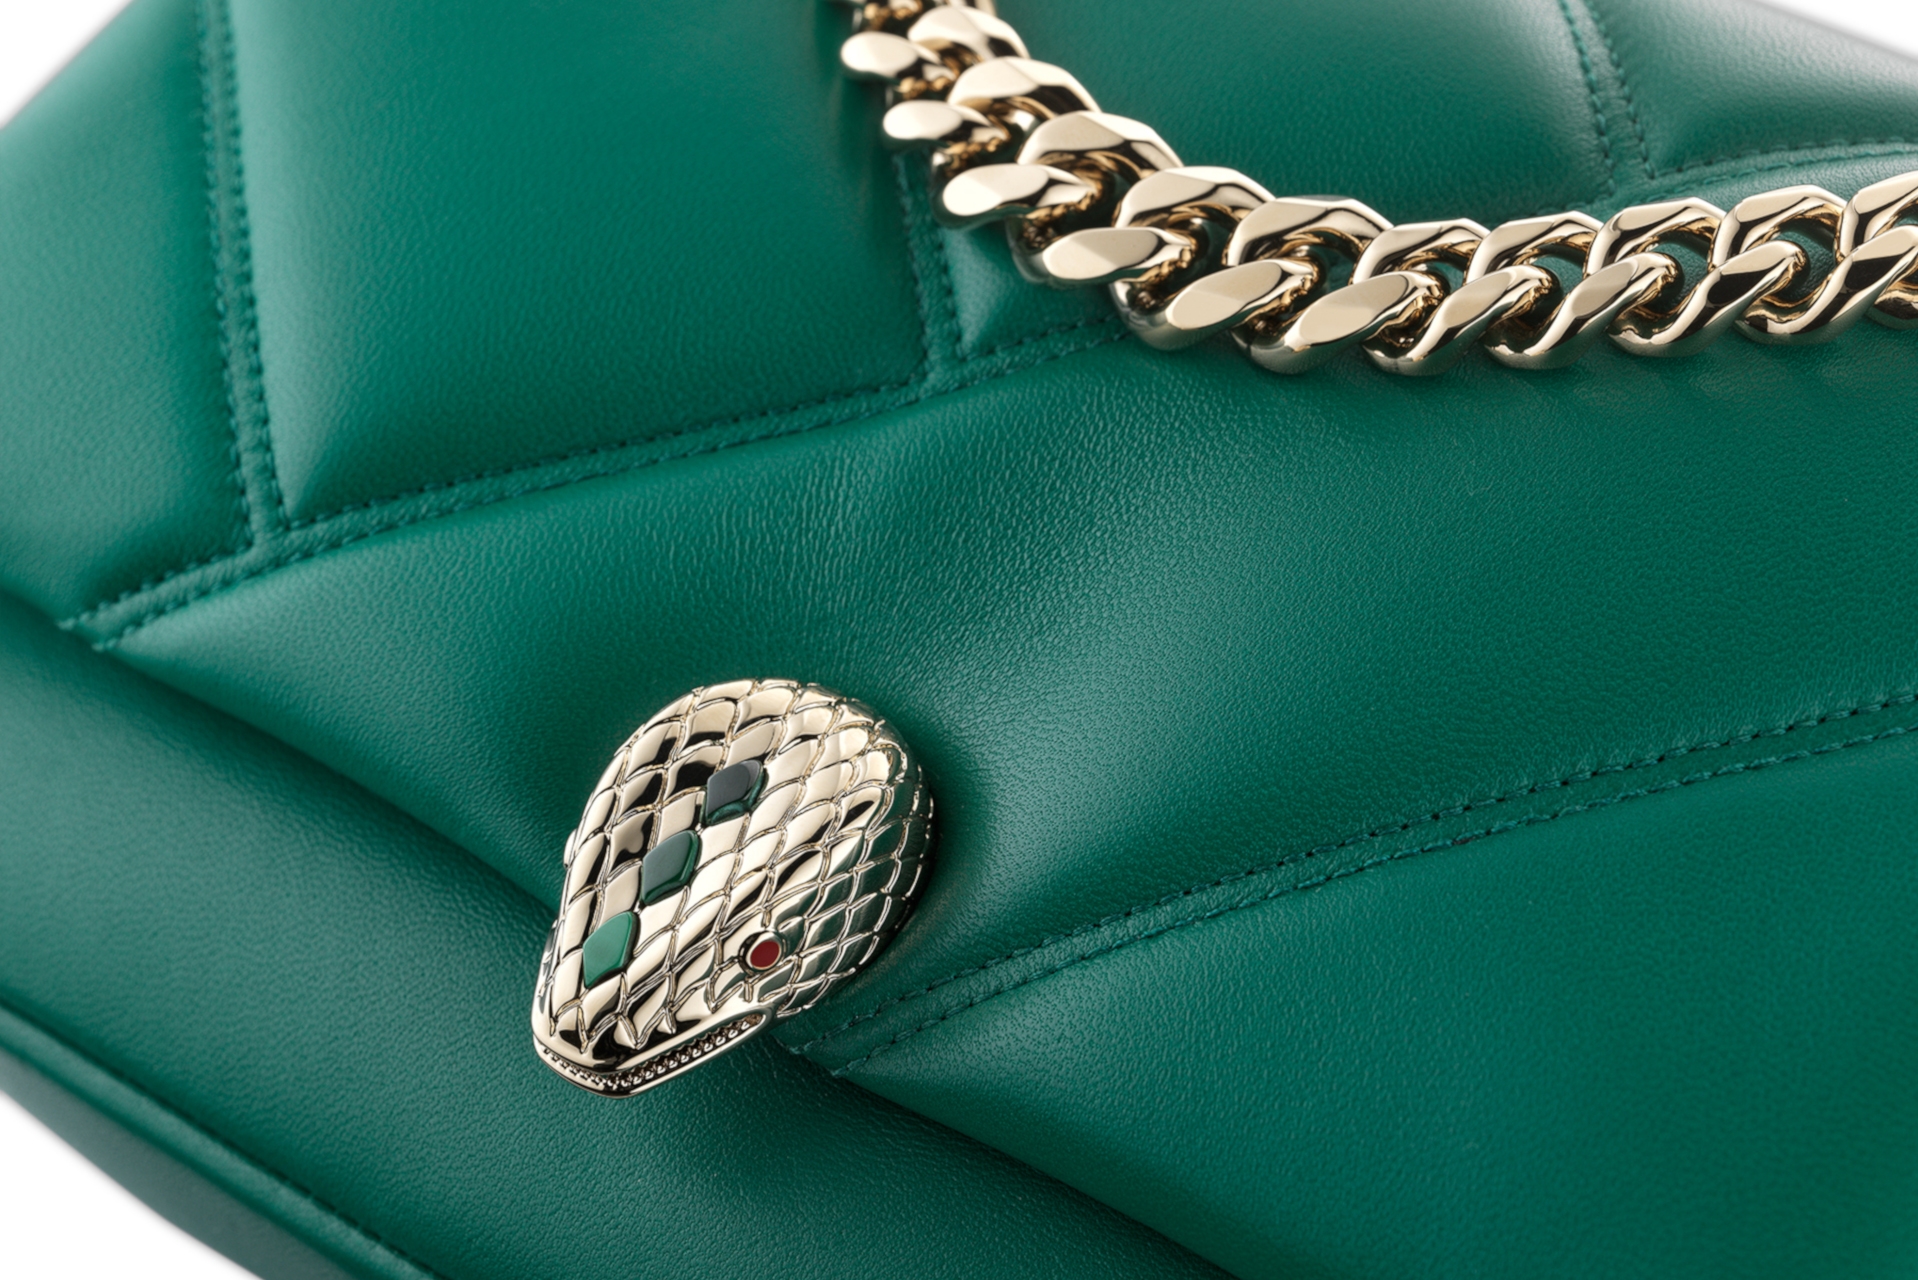 Bulgari on X: Different street style, same Serpenti shade and shape.  Proving the versatility of the Serpenti Ellipse design, this nano sized-bag  adds a miniaturized touch of vibrant Roman sophistication to a